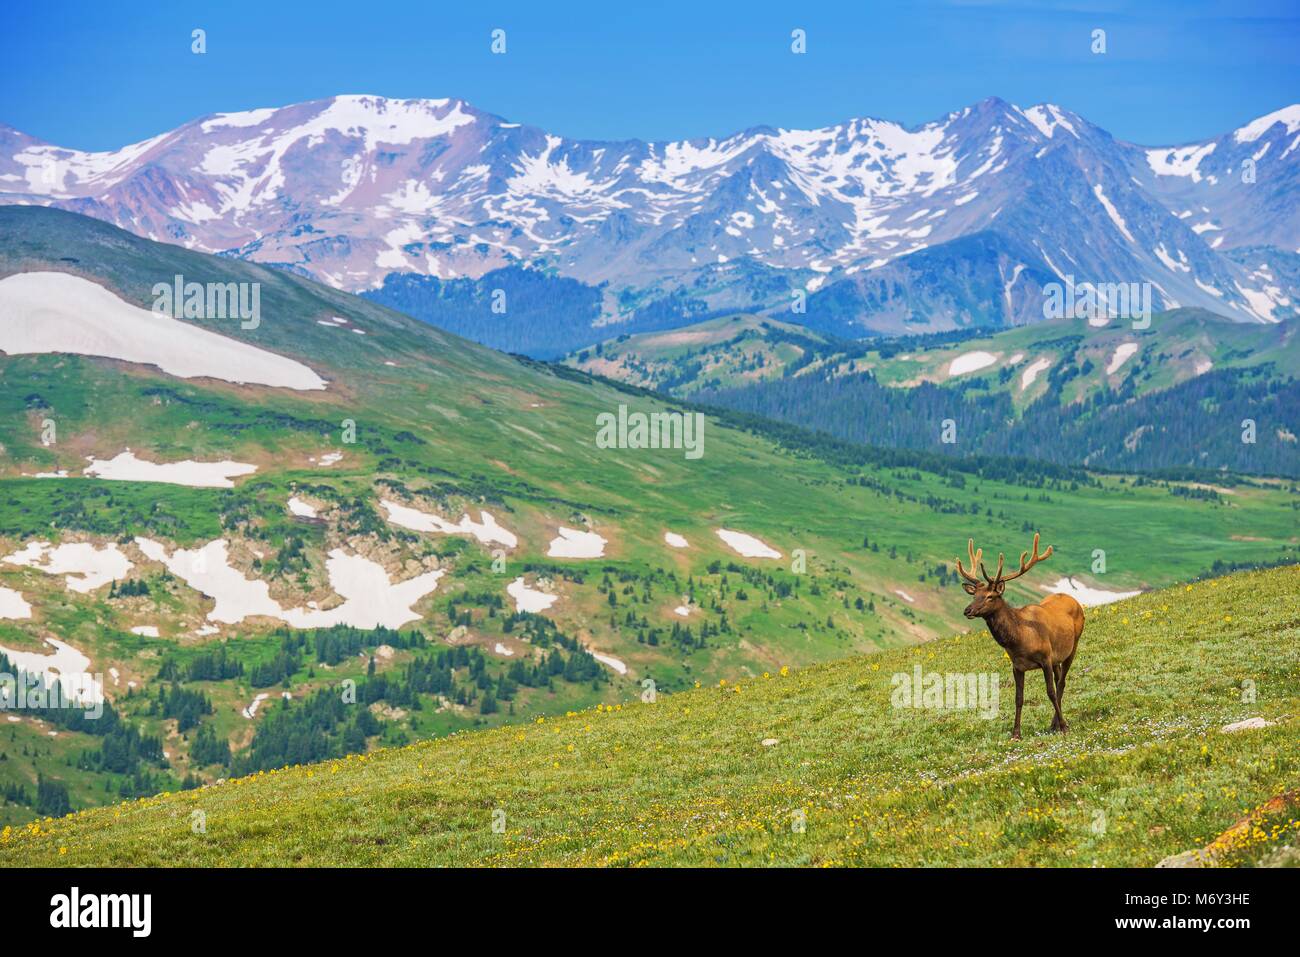 Lonely Elk on the Alpine Meadow in Colorado, United States. Colorado Rocky Mountains Wilderness. Stock Photo